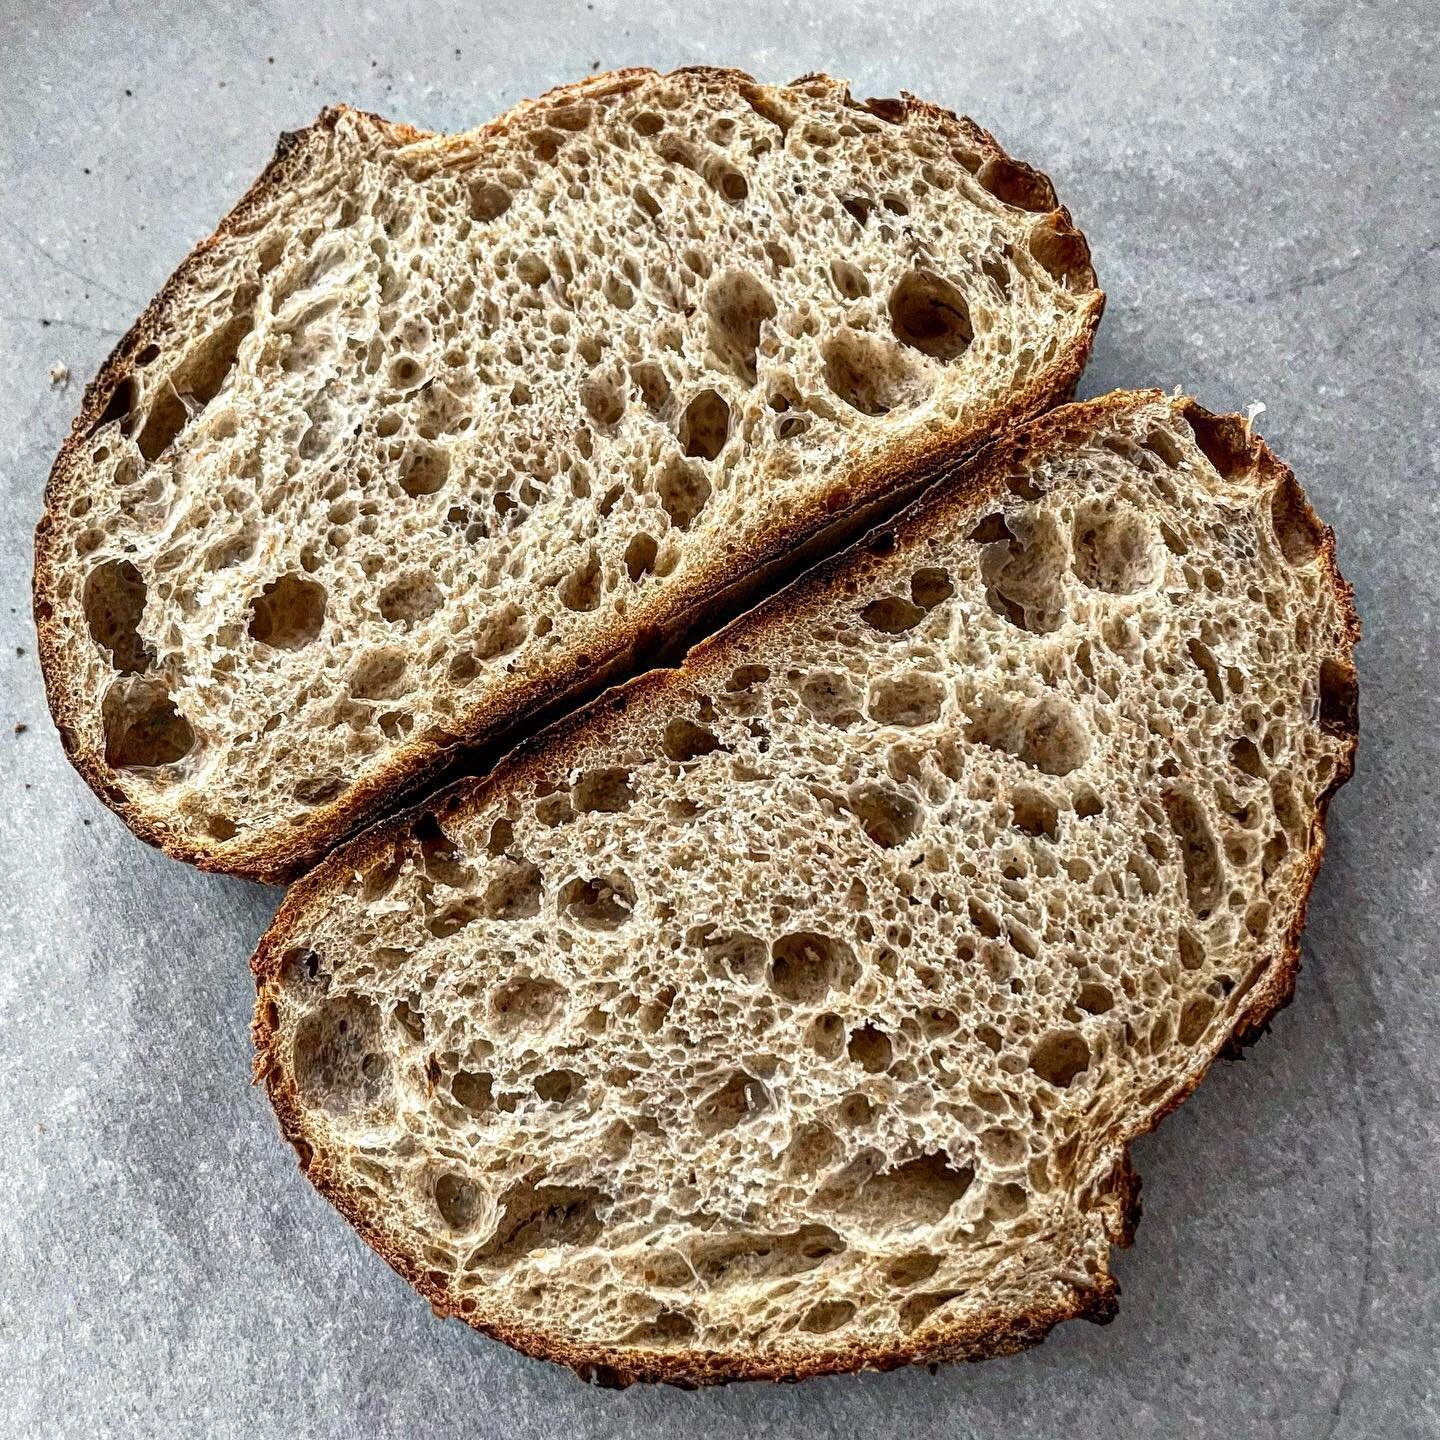 There&rsquo;s beauty in the simplicity of it.
Flour + water + salt + starter = bread.
.
It&rsquo;s like salt on meat over a flame. Humans have done 1000s of things to modify it over the millennia and the most simple form is still amongst the best.
.
